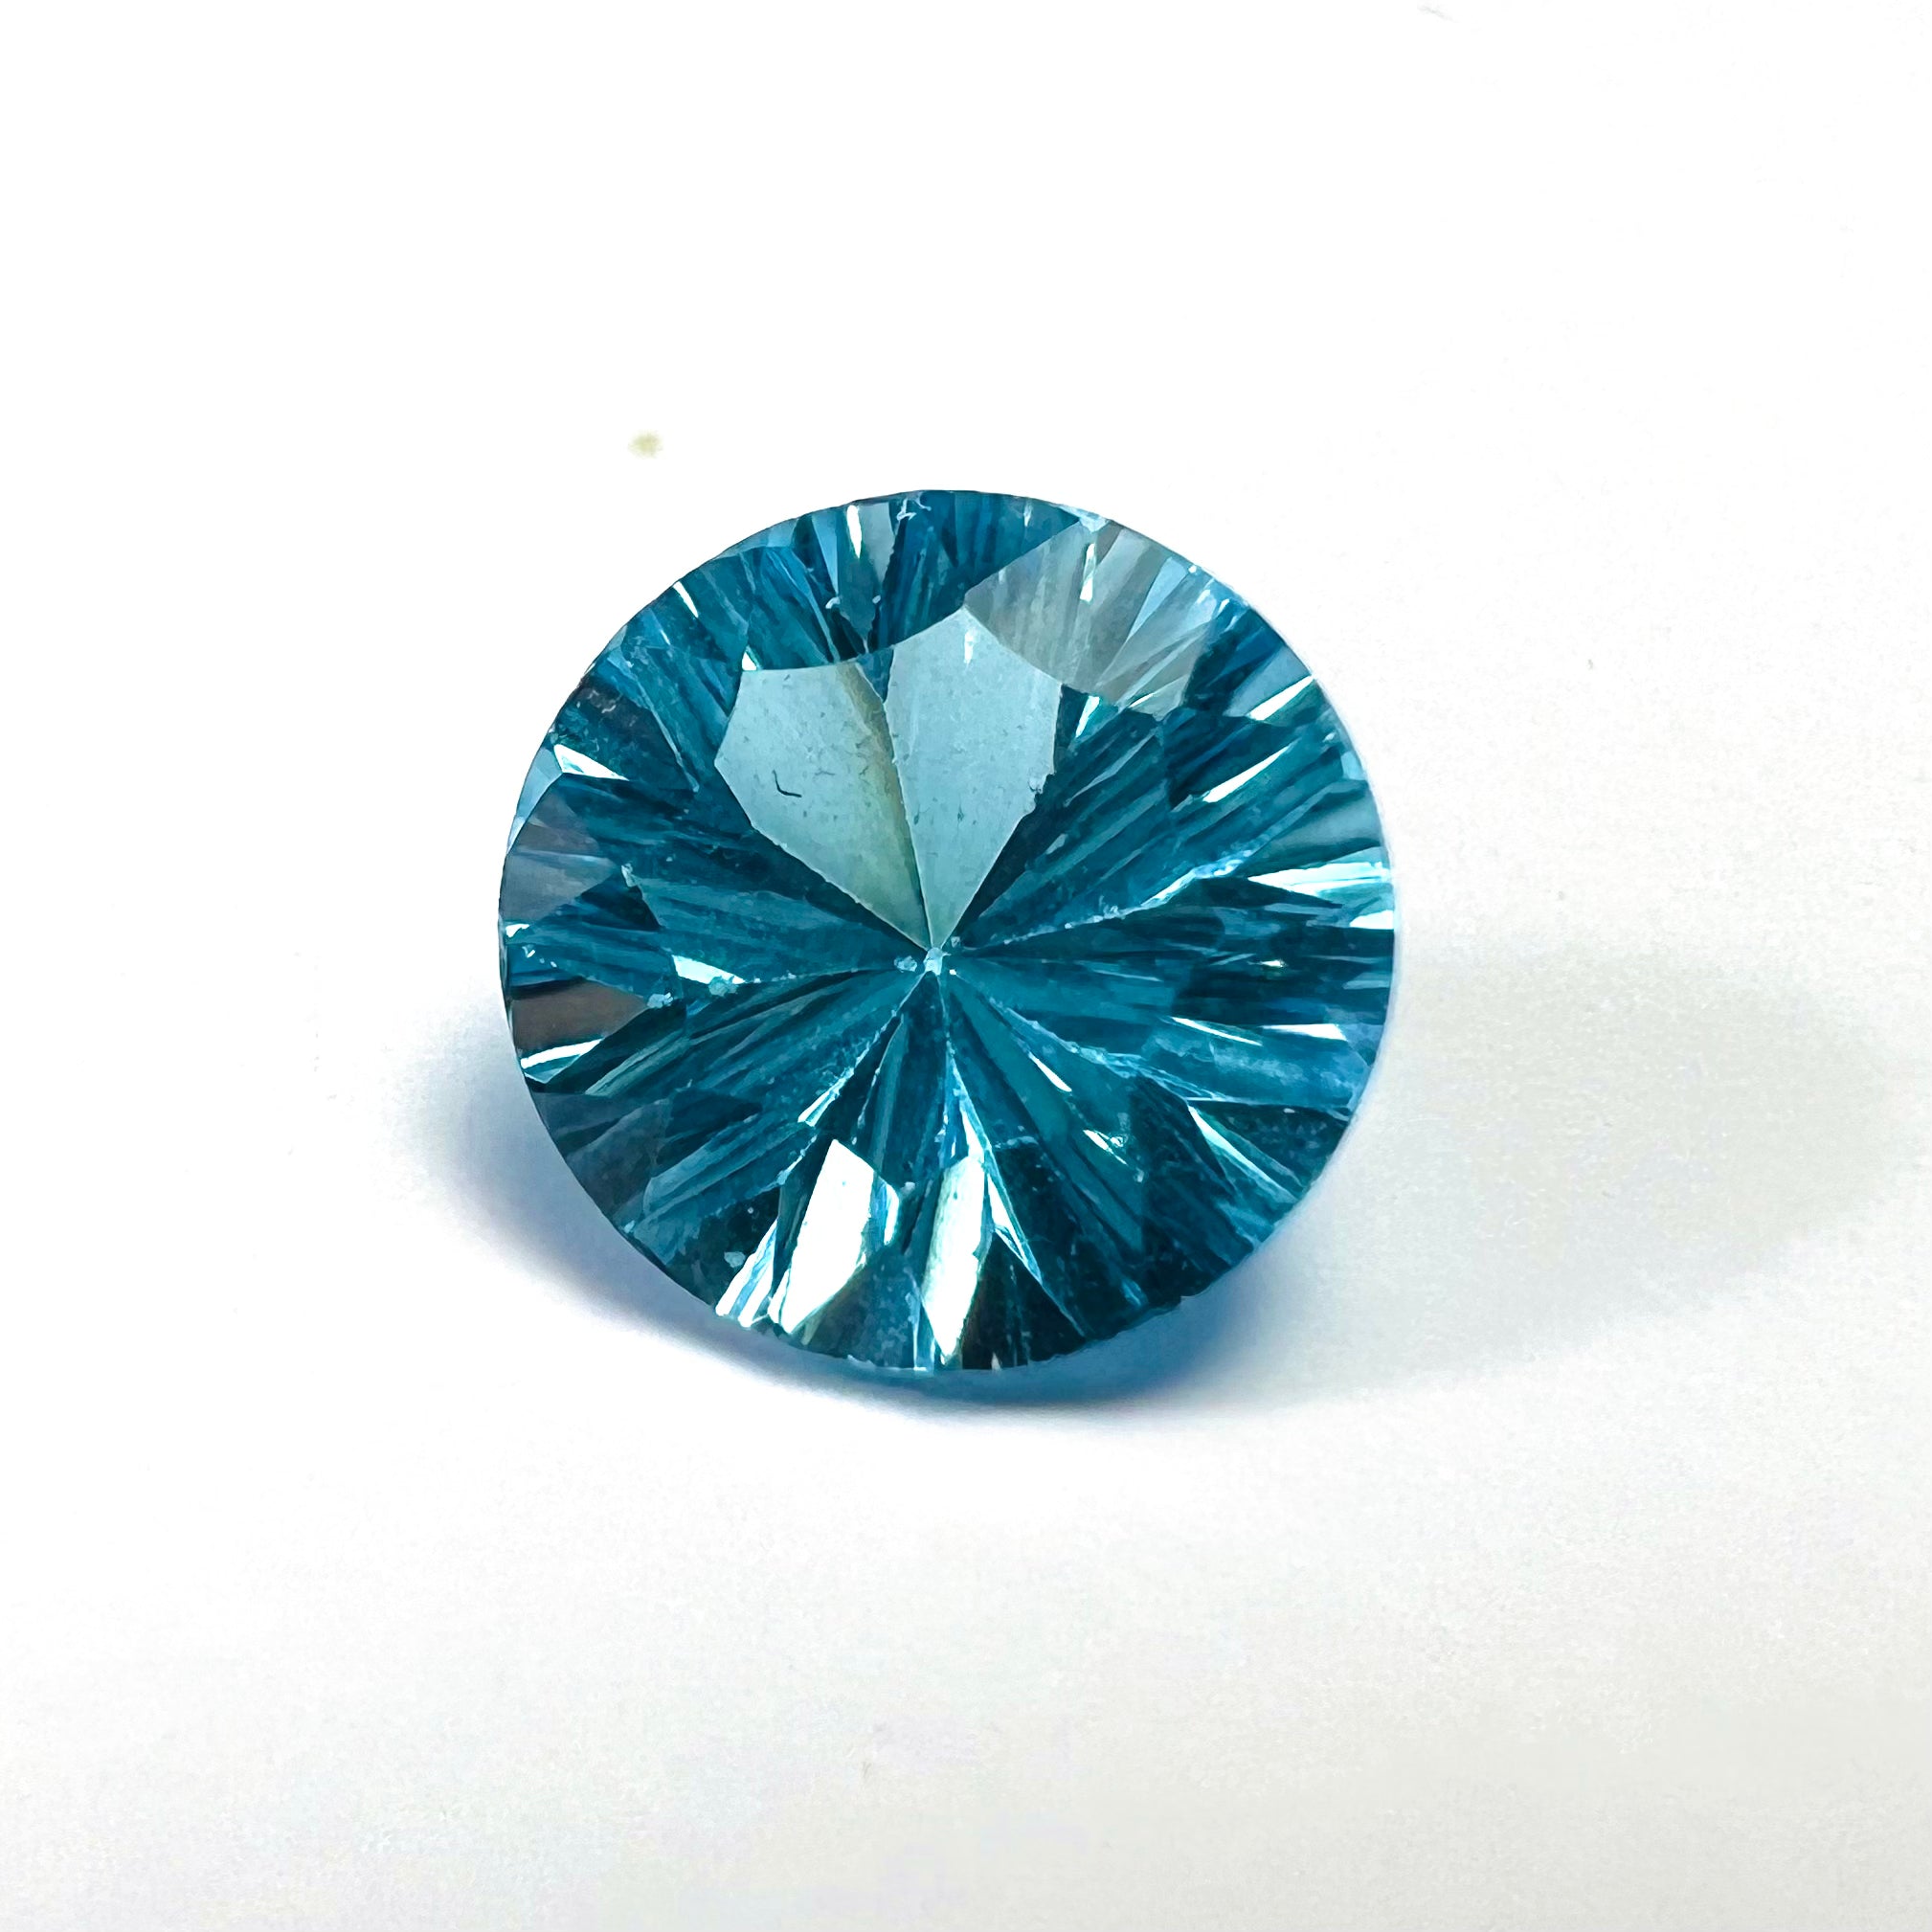 2.88CTW Loose Natural Round Cut Topaz 9x5.6mm Earth mined Gemstone